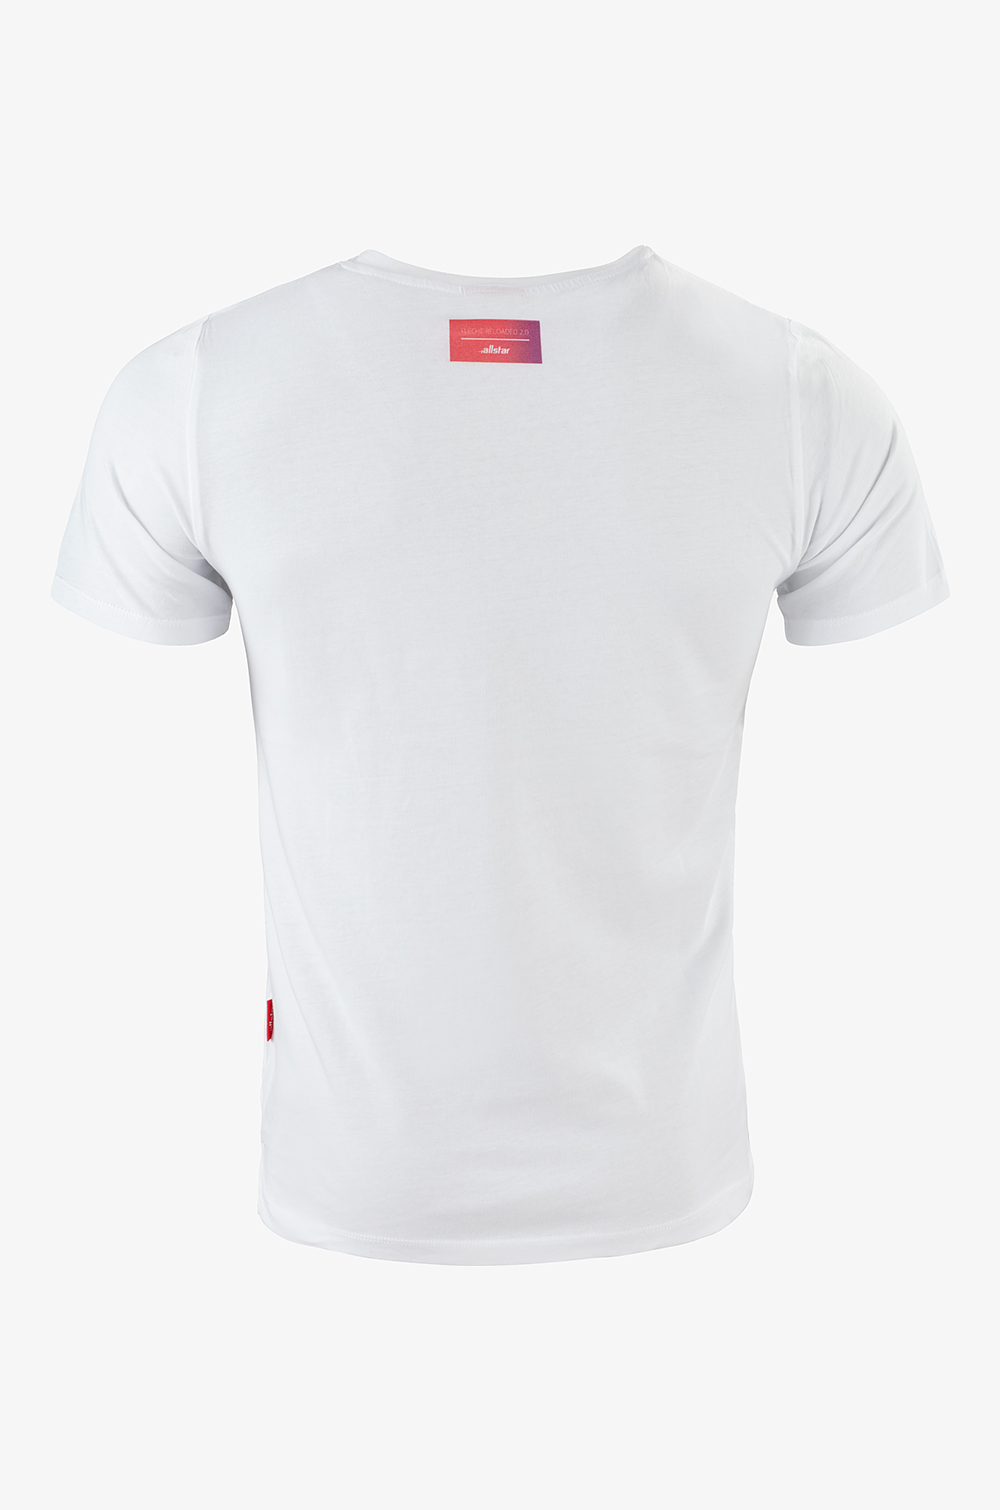 Flèche Reloaded 2.0 T-Shirt (white/red)